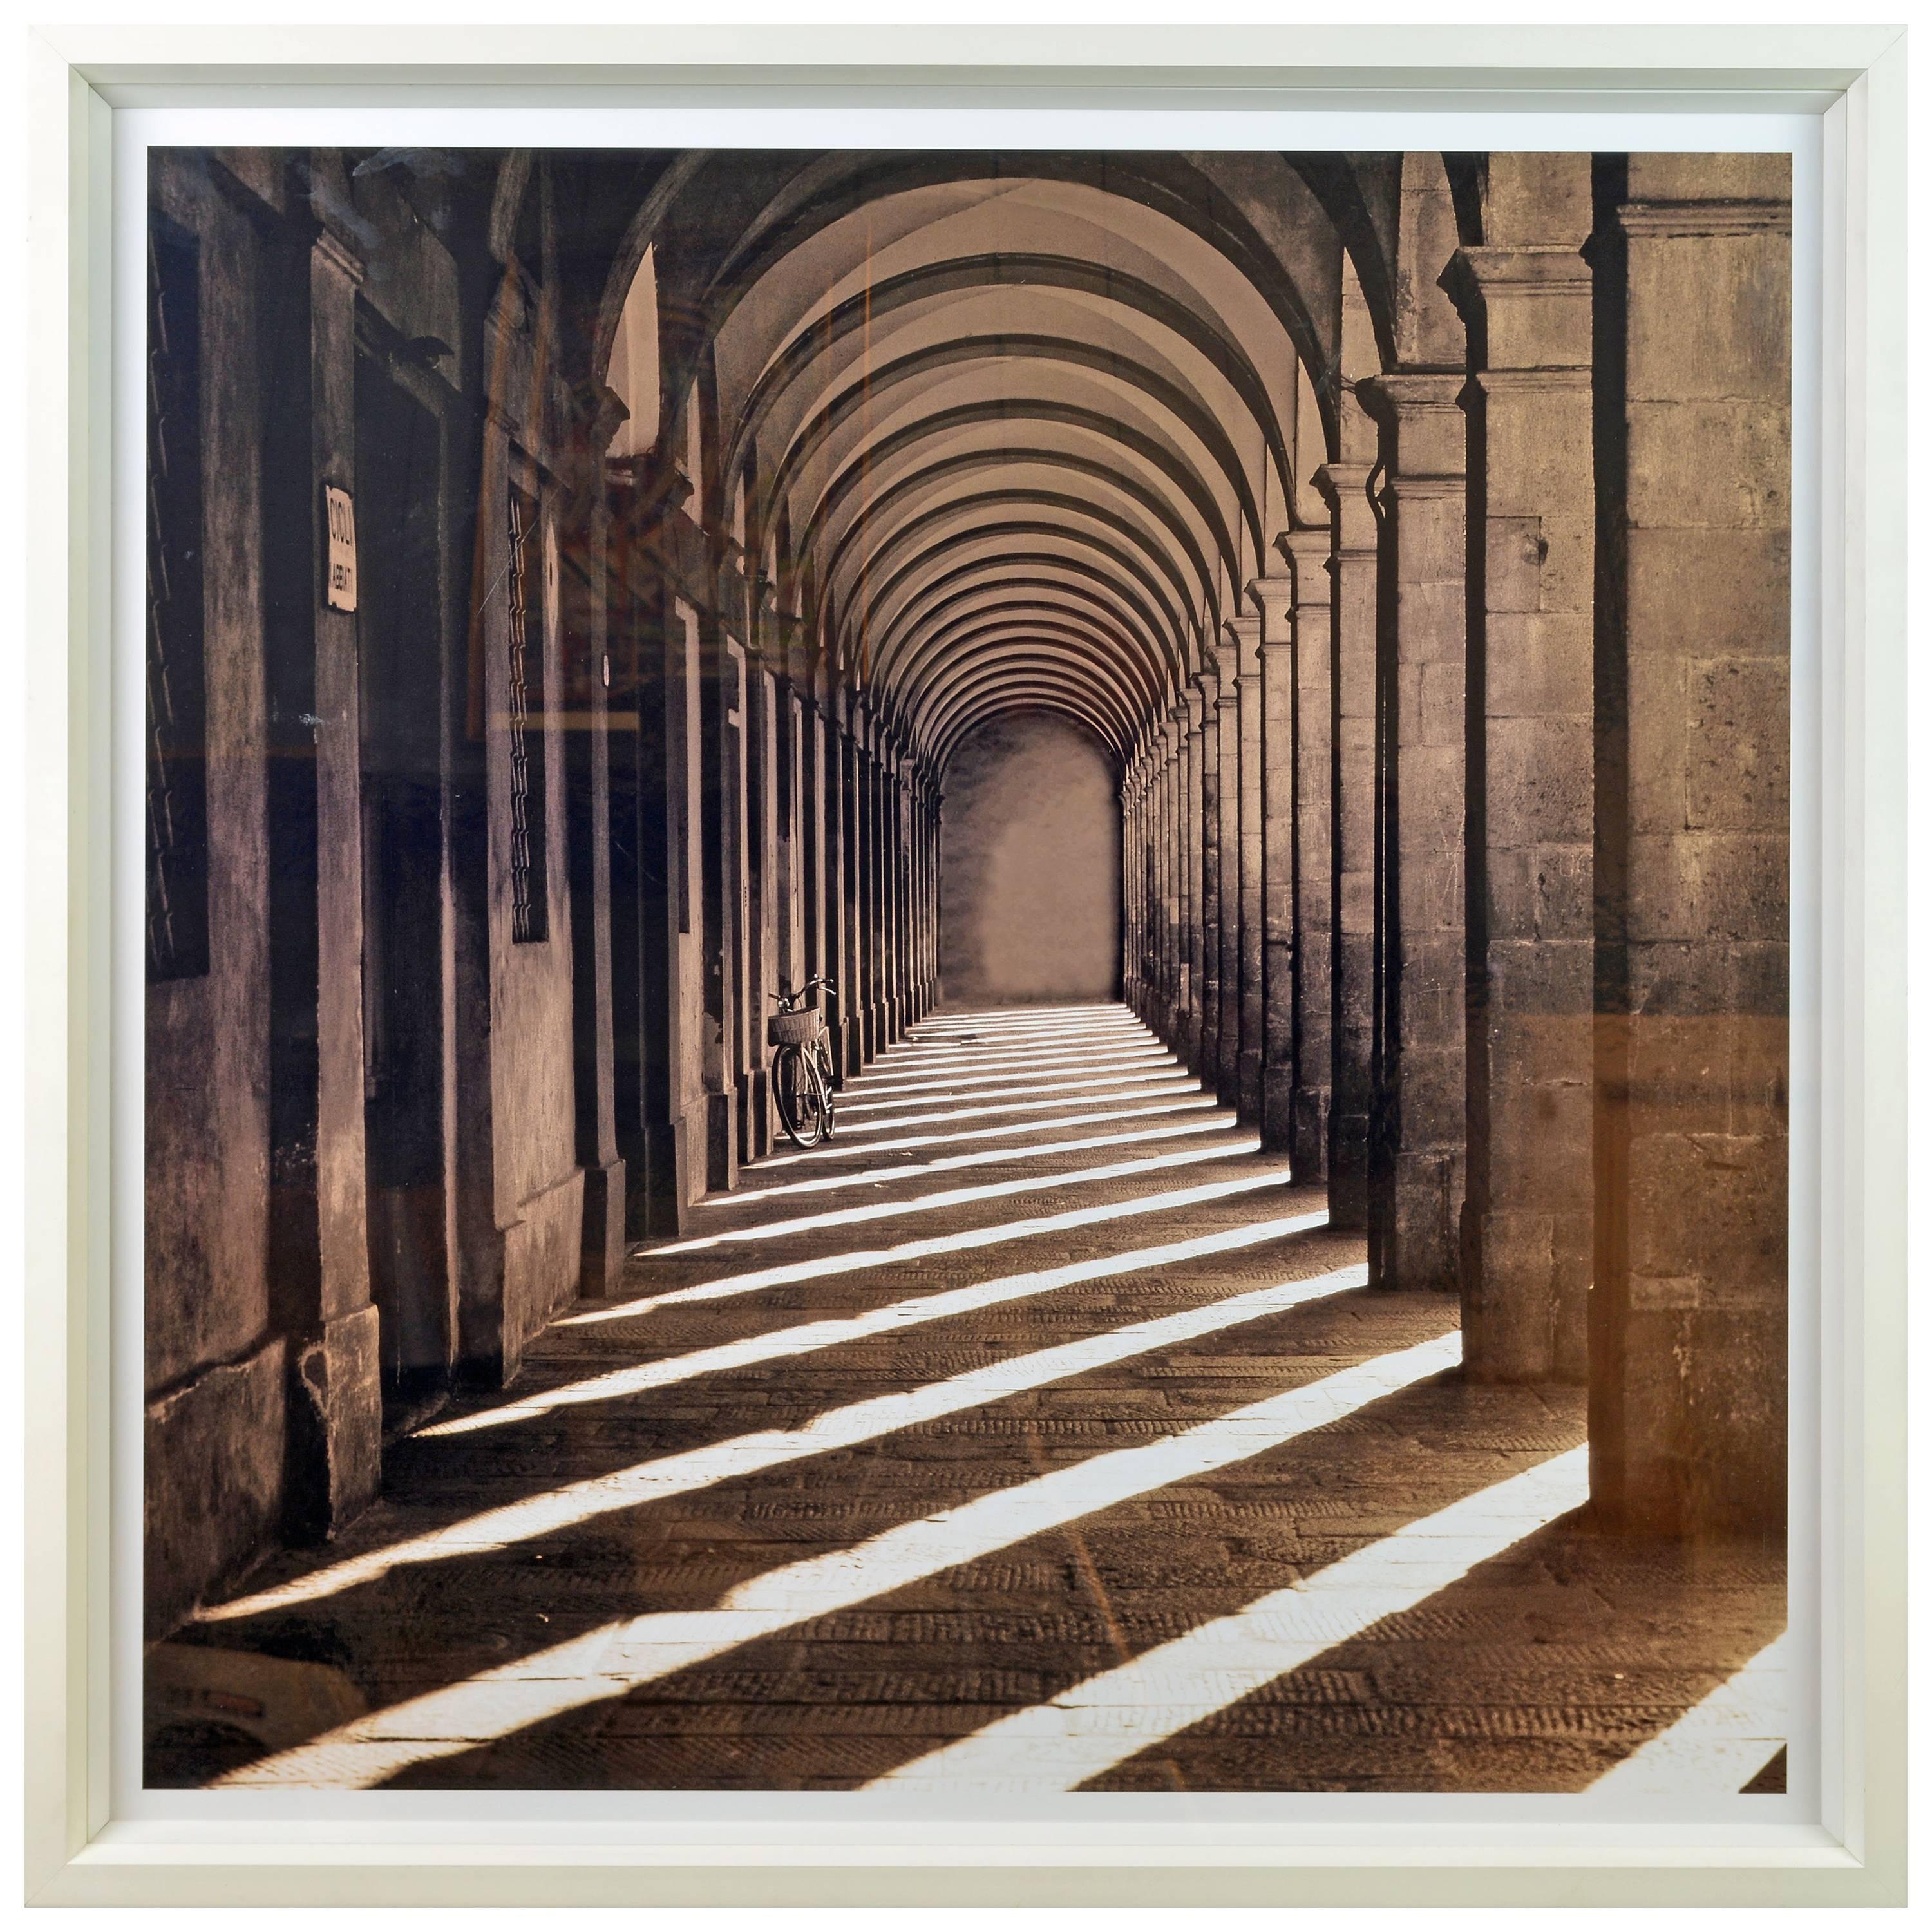 'Lucca Tuscany Italy' Photo by Charlie Waite for Trowbridge Gallery with COA